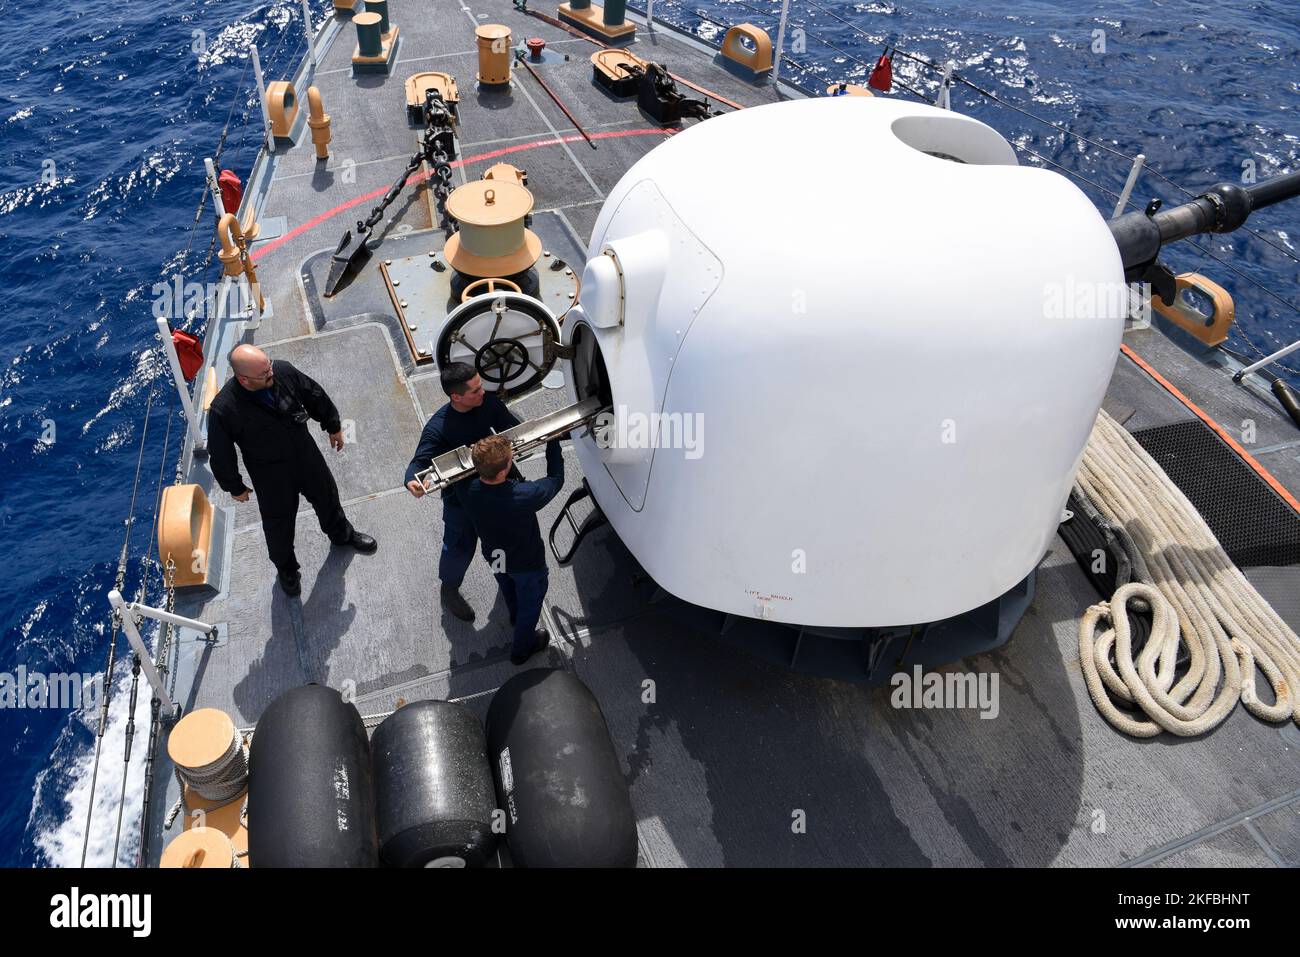 (Left to right) U.S. Coast Guard Chief Petty Officer Craig Horrighs, Seaman Santiago Jauregui, and Ensign Seth Anderson download the MK-75 gun on the USCGC Mohawk (WMEC 913) while underway in the Atlantic Ocean, Sept. 2, 2022. Mohawk is on a scheduled deployment in the U.S. Naval Forces Africa area of operations, employed by U.S. Sixth Fleet to defend U.S., allied, and partner interests. Stock Photo